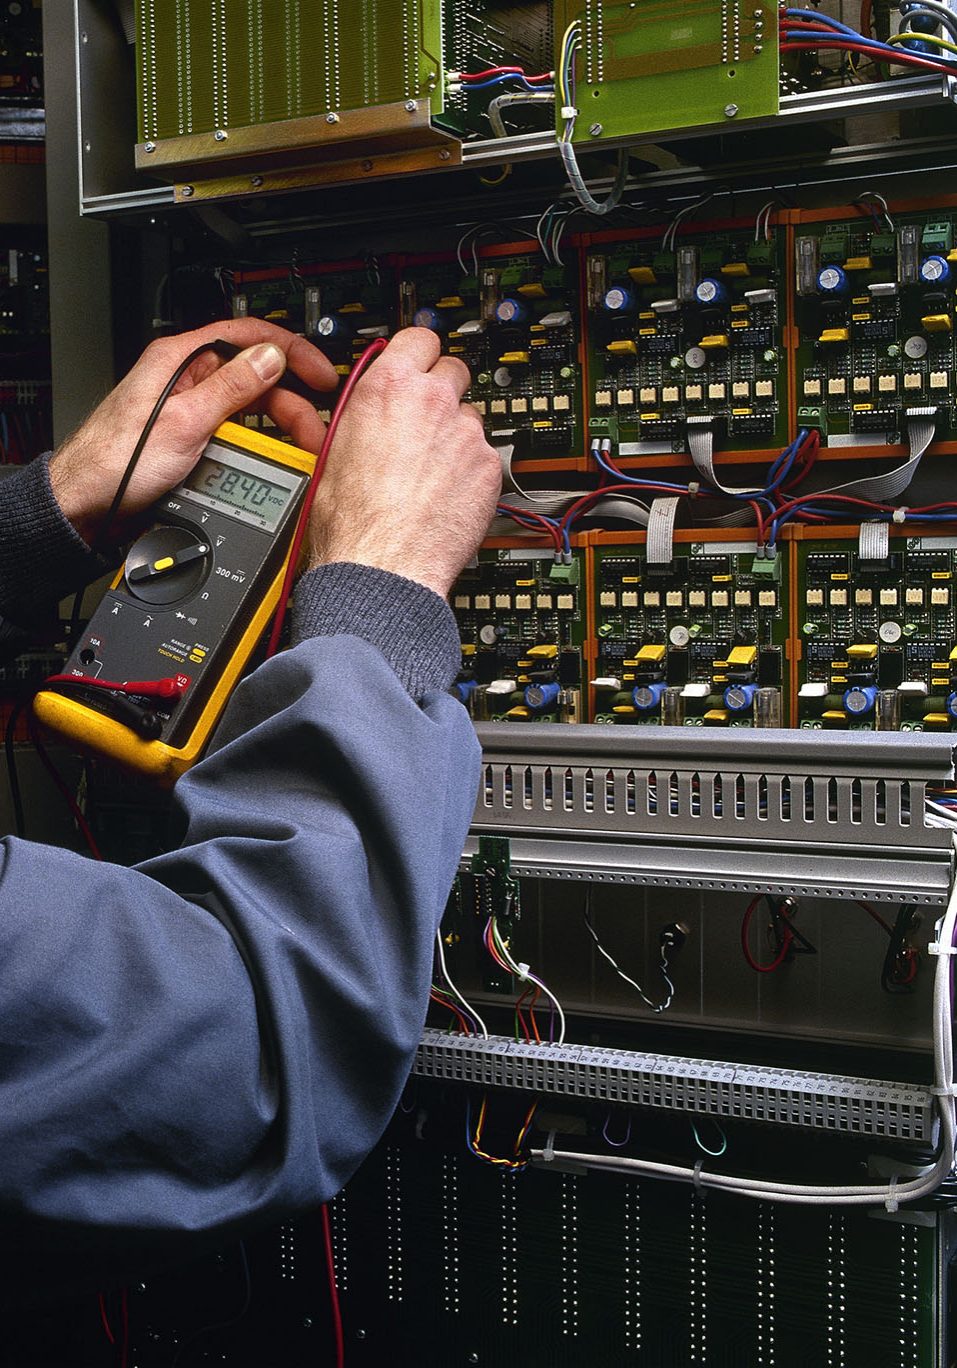 An image of a electrician testing some electrics